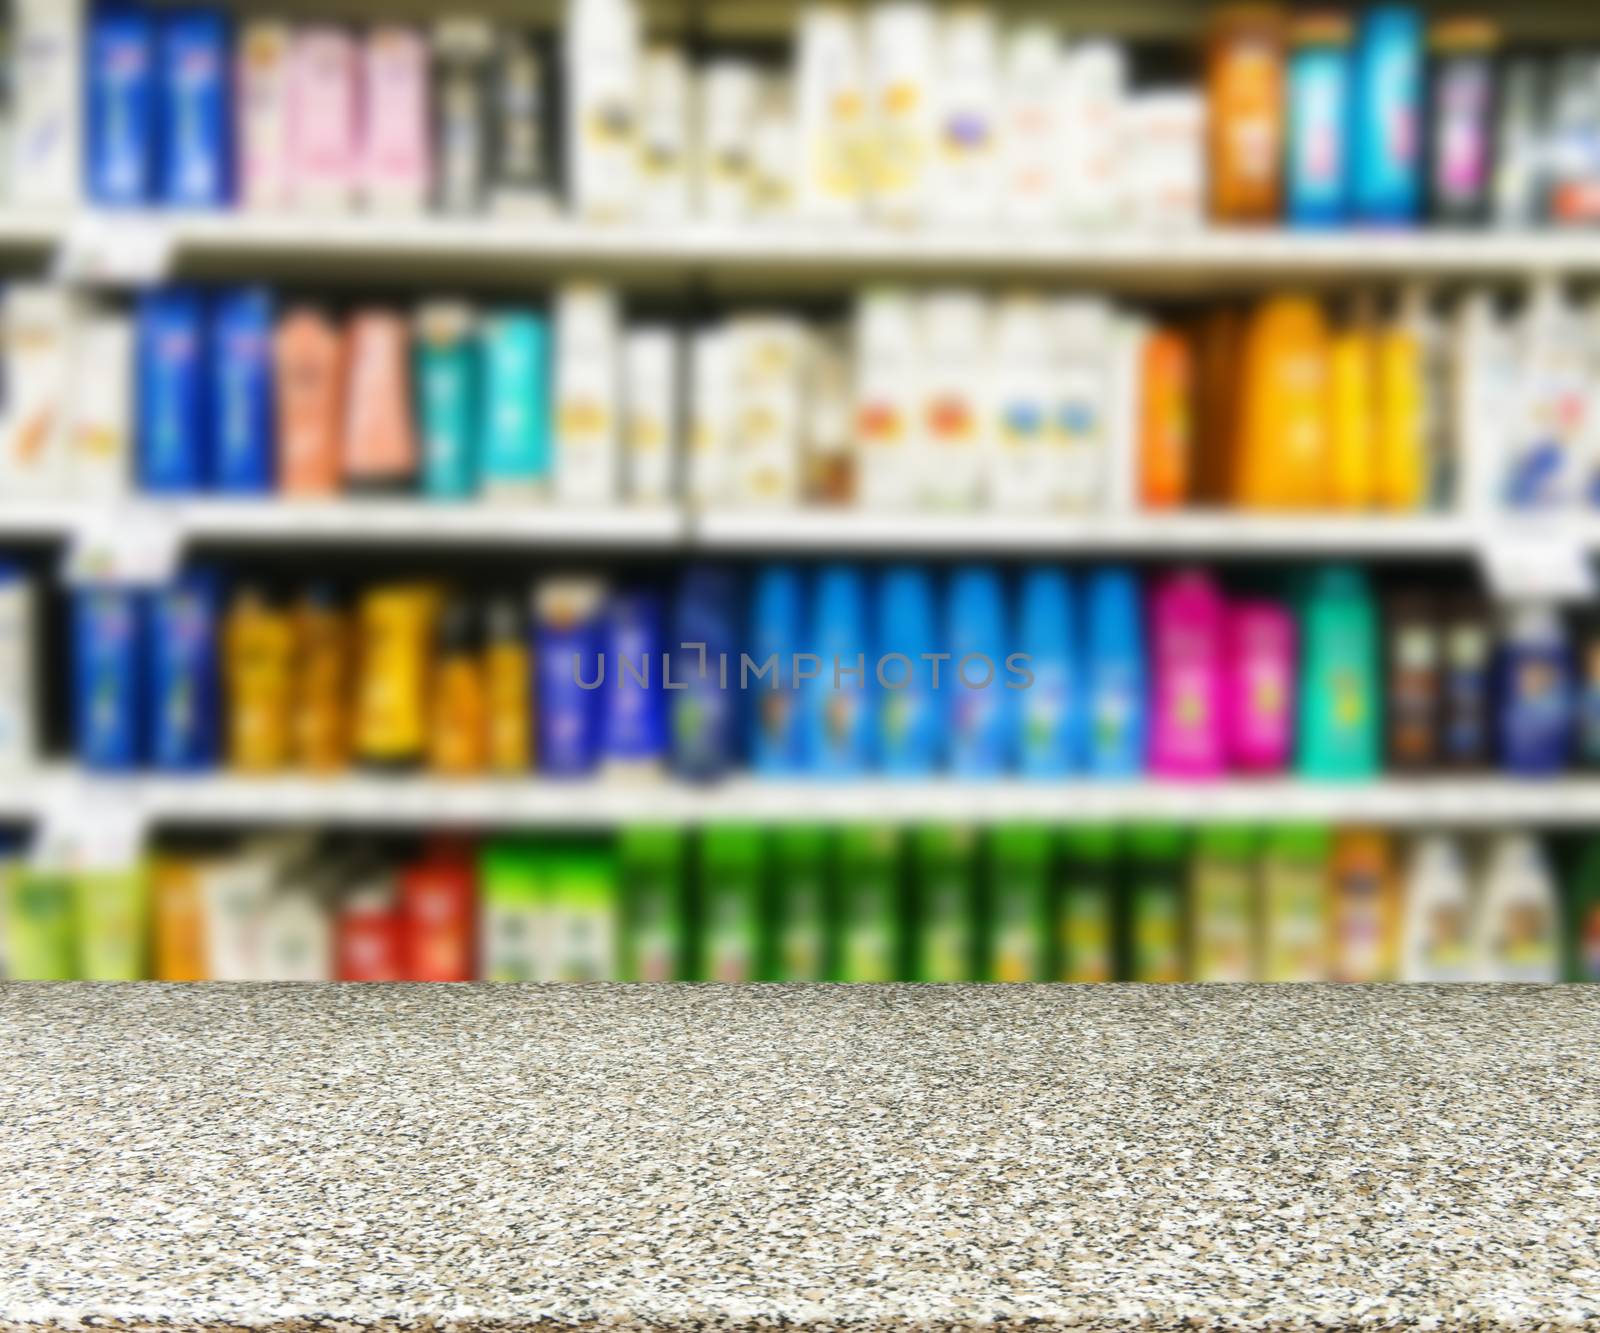 Marble board empty table in front of blurred background. Perspective marble table over blurred colorful supermarket products on shelvest - mock up for display of product.